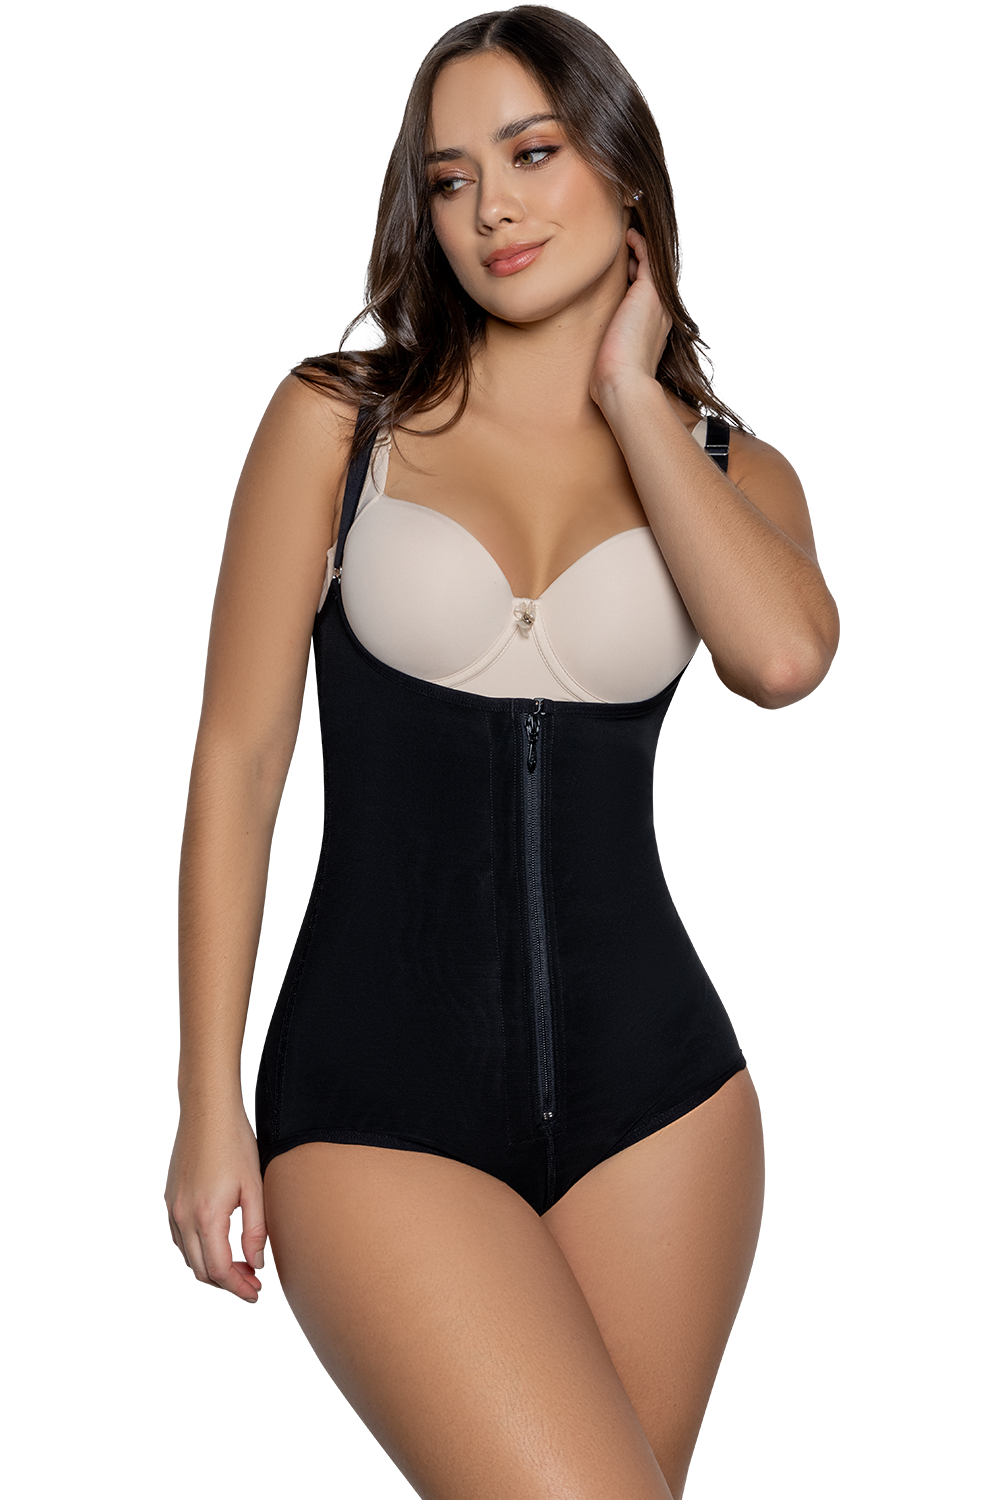 Jackie London Long Body Shaper w/ Brassiere and Sleeves Post